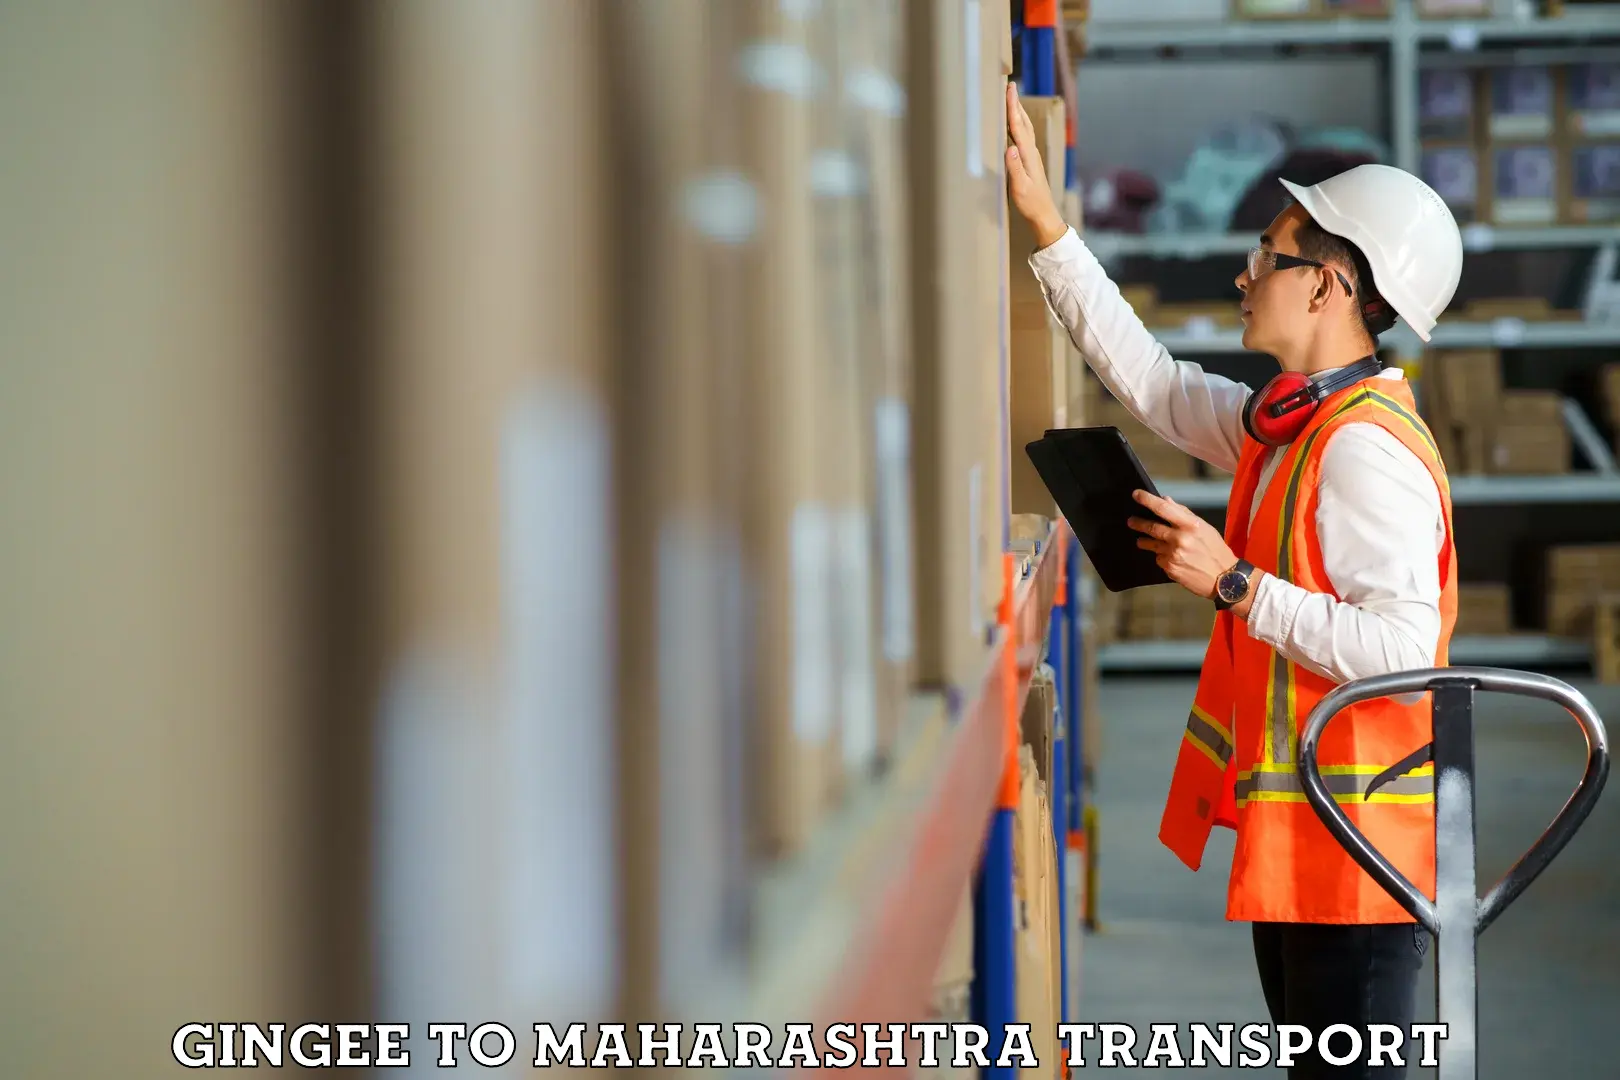 Transport shared services Gingee to Maharashtra